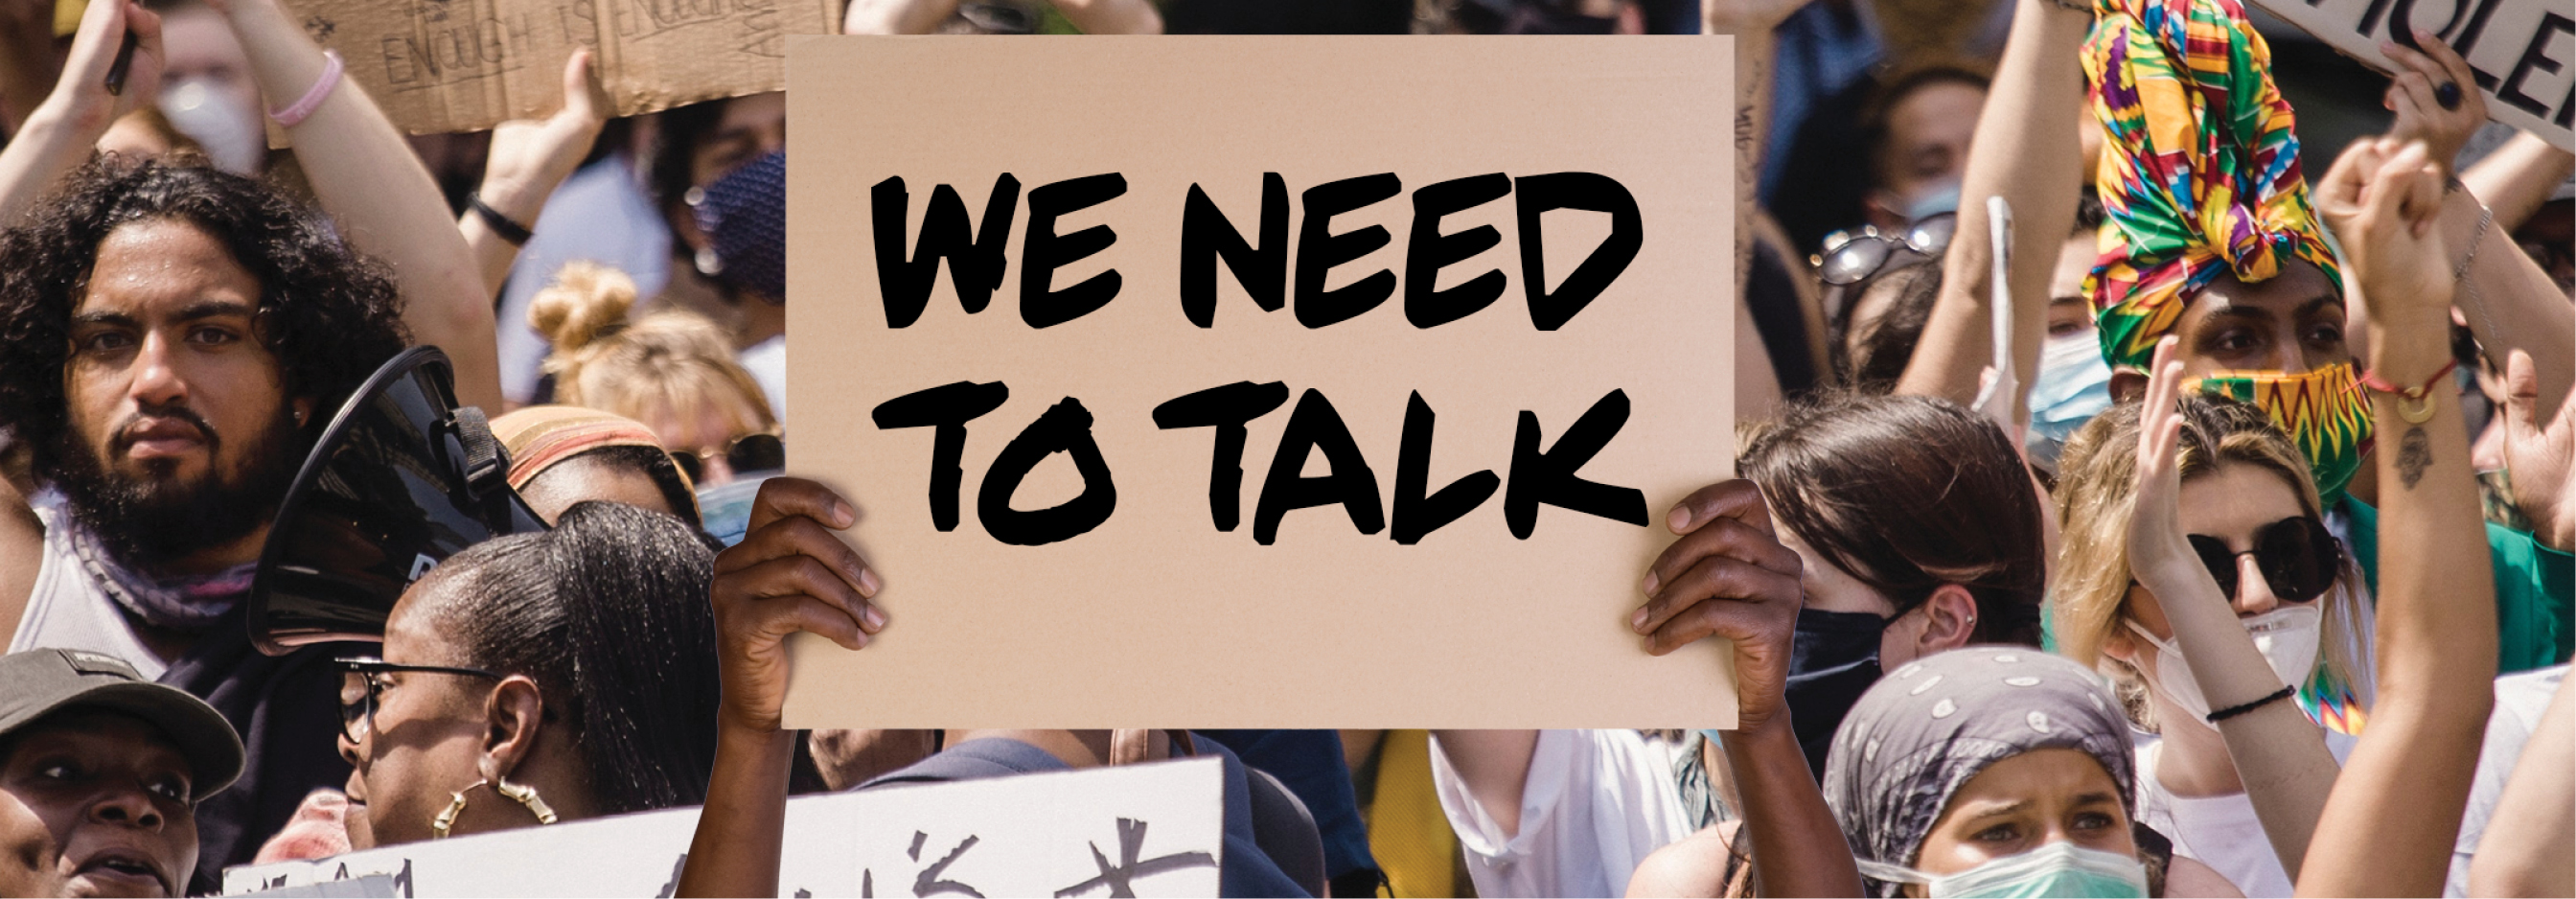 We Need To Talk: Conversations on Racism for a More Resilient Las Vegas, Episode 9: We Need To Talk About Anti-Asian Hate